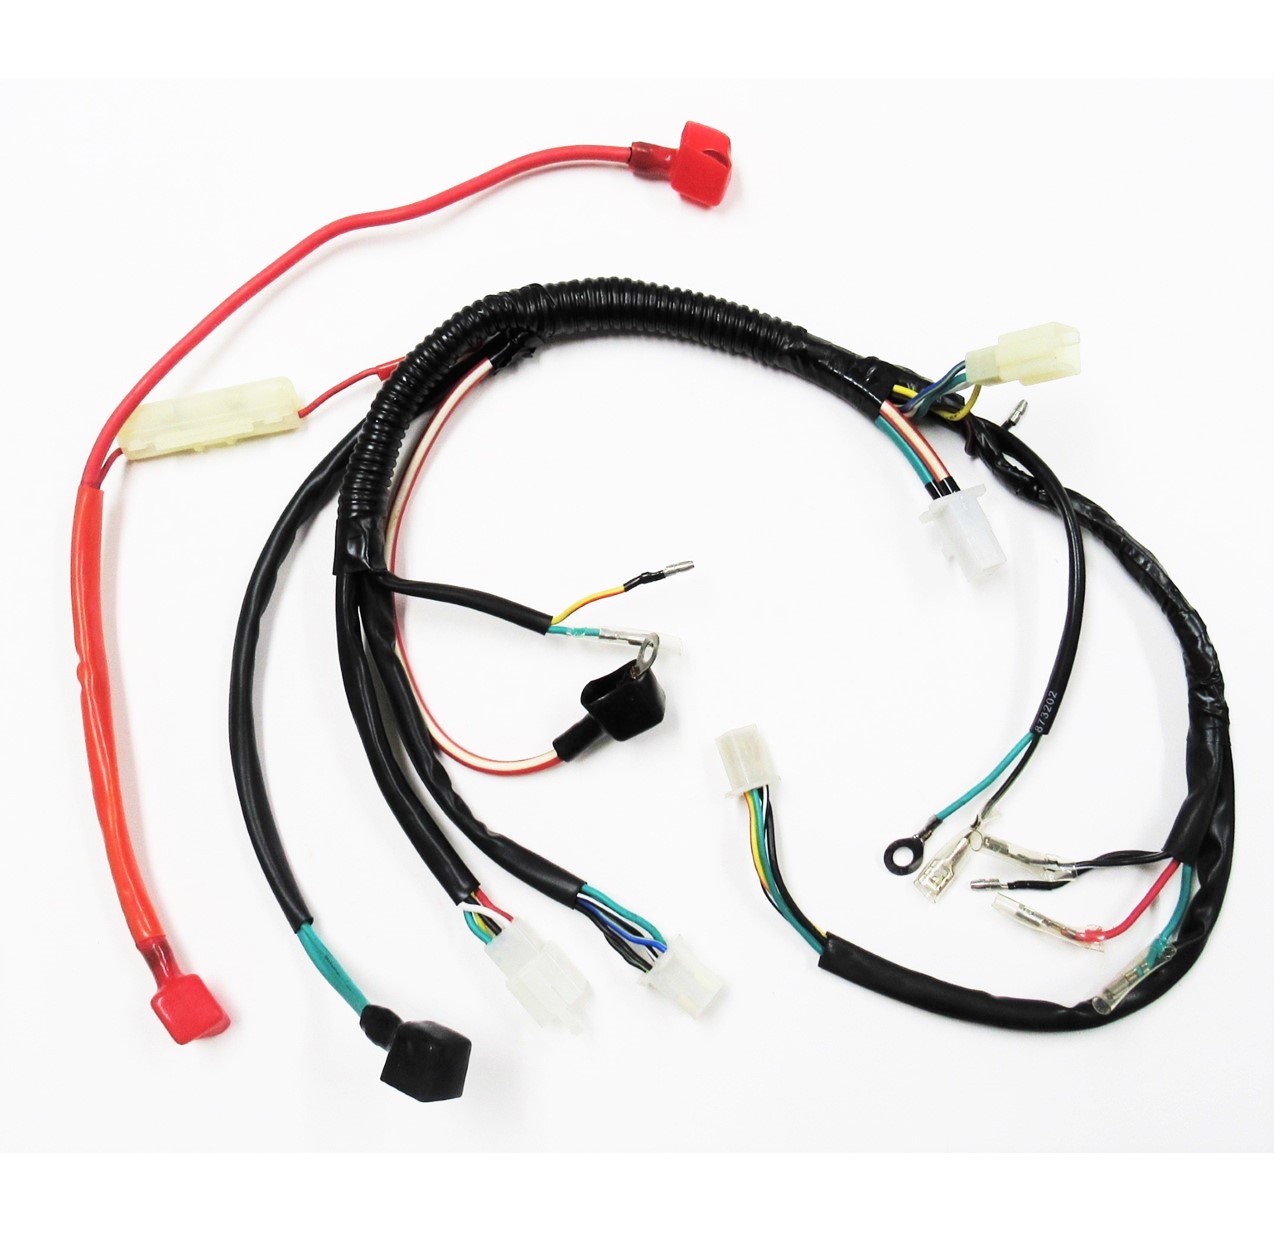 Wiring Harness Fits Tomberline and many other small 50-125cc dirt bikes.